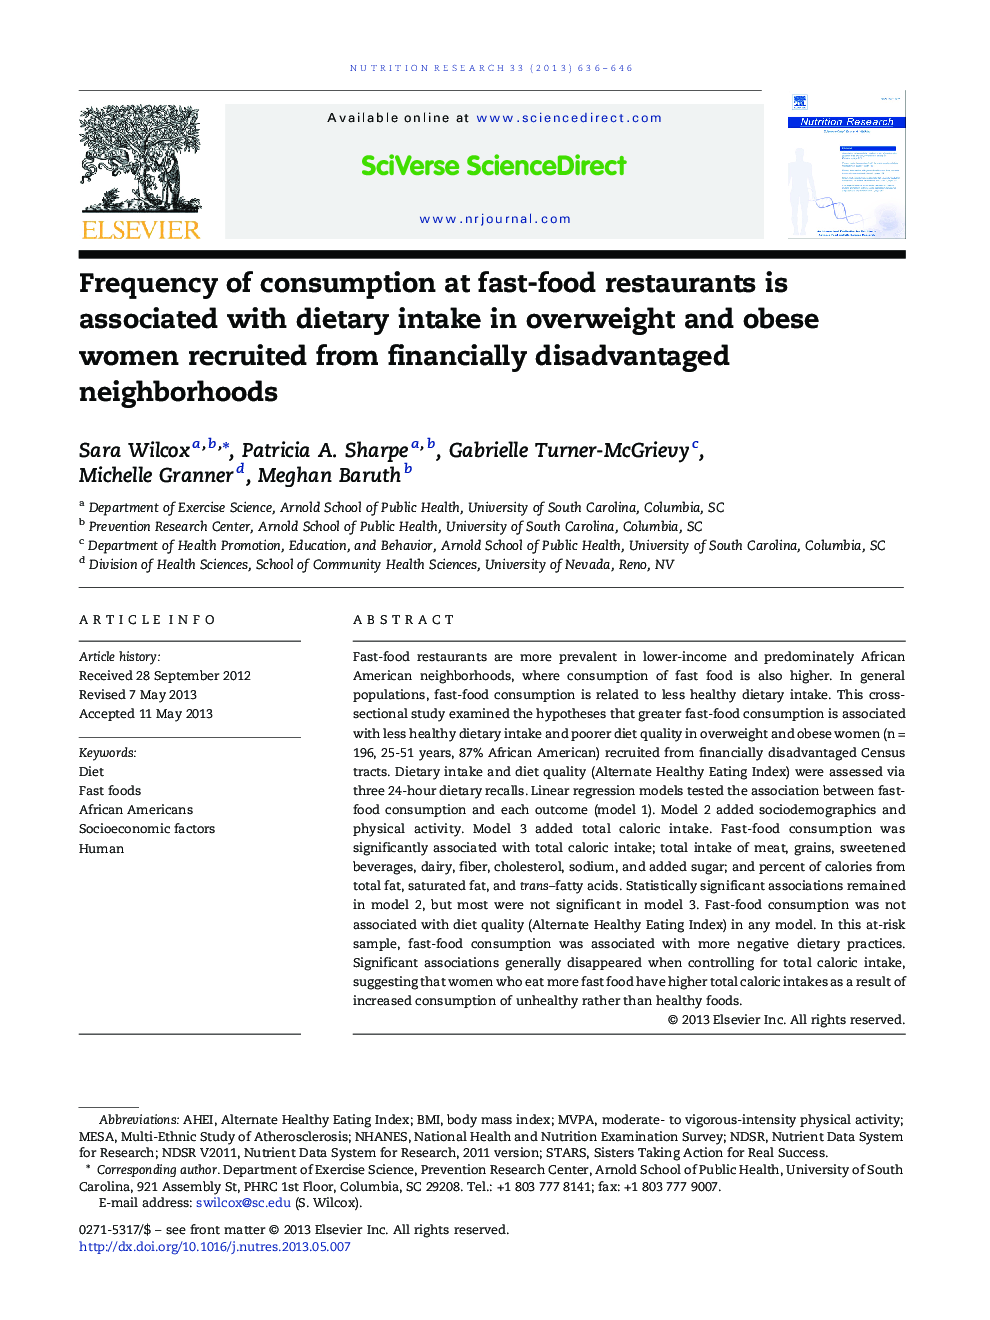 Frequency of consumption at fast-food restaurants is associated with dietary intake in overweight and obese women recruited from financially disadvantaged neighborhoods